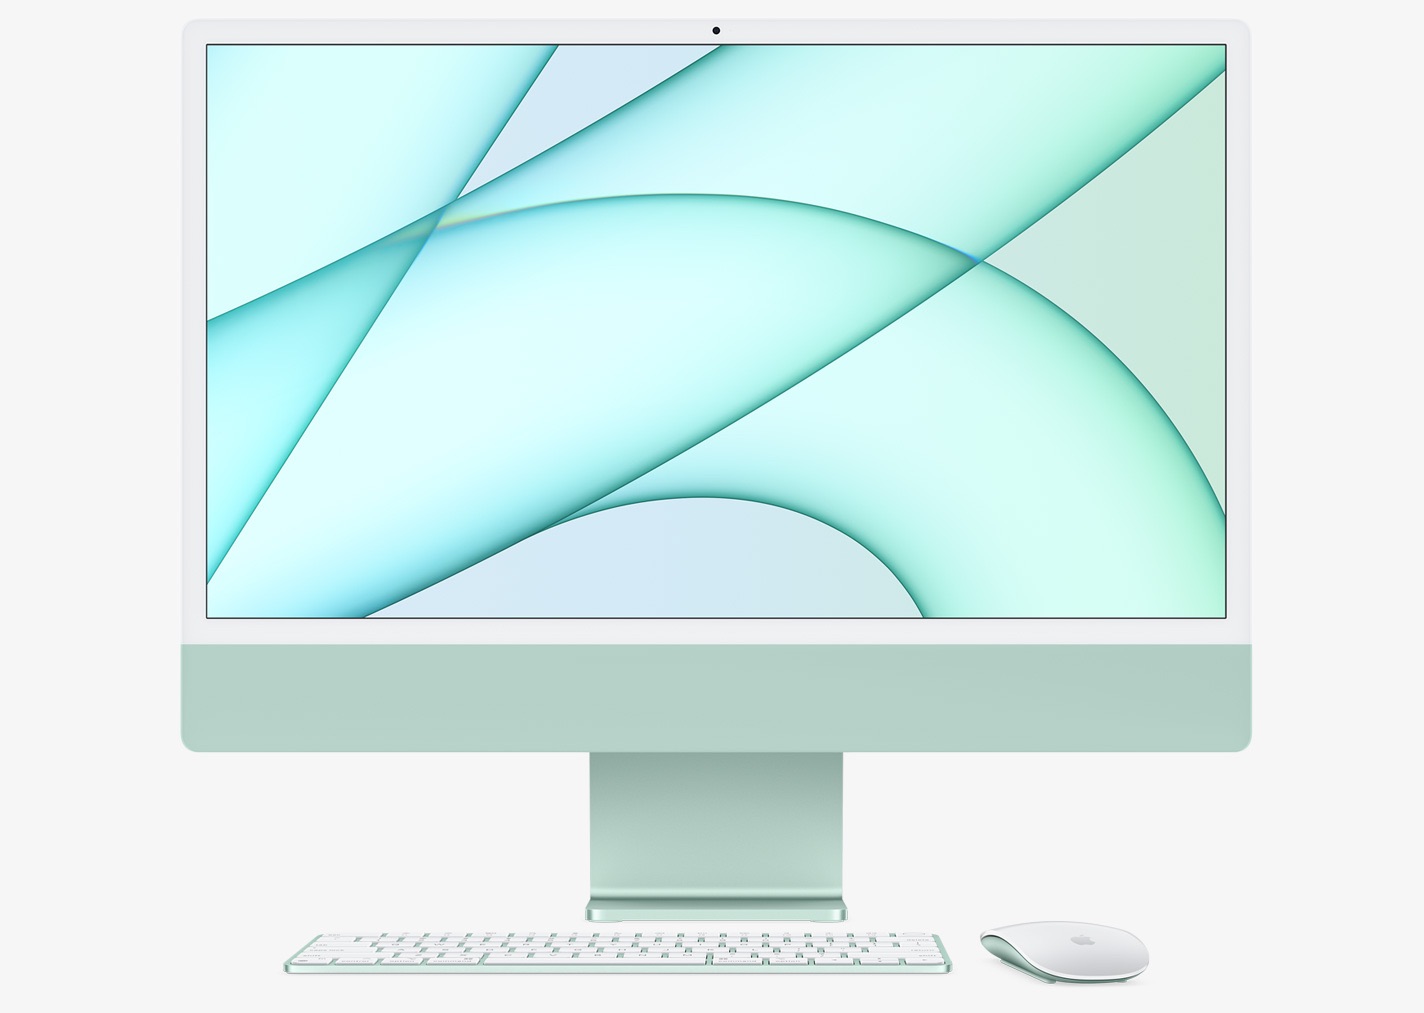 Larger iMac With Around 32-Inch Display Reportedly in Early Testing -  MacRumors